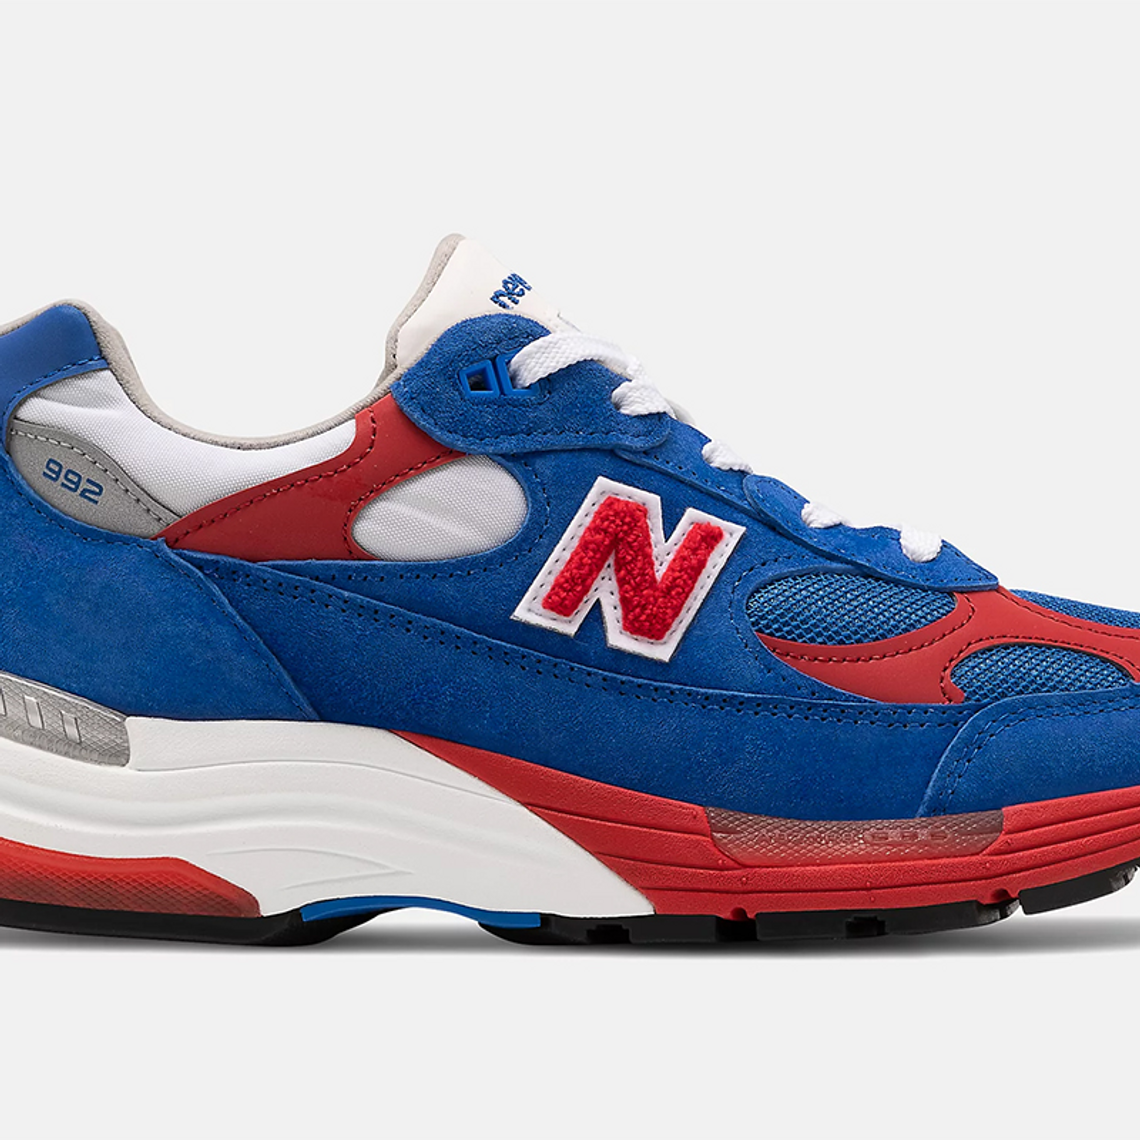 Lotsbestemming Hassy partner New Balance Dress Up the 992 in Red, White and Blue - Sneaker Freaker